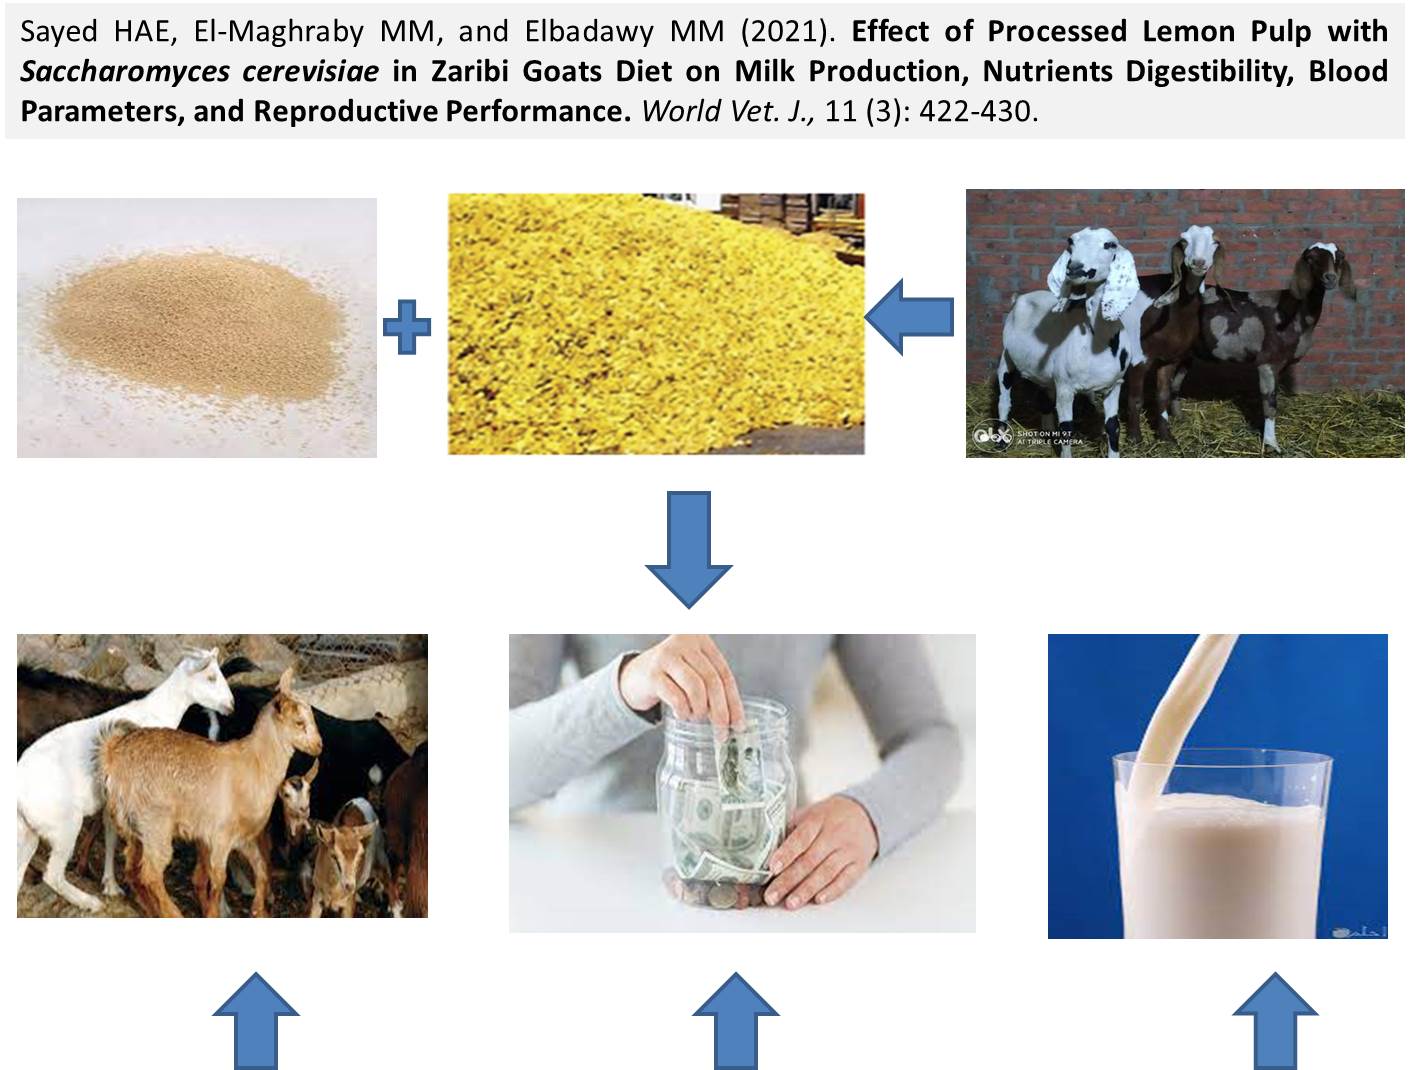 55-Processed_Lemon_Pulp_with_Saccharomyces_cerevisiae_in_Zaribi_Goats_Diet_